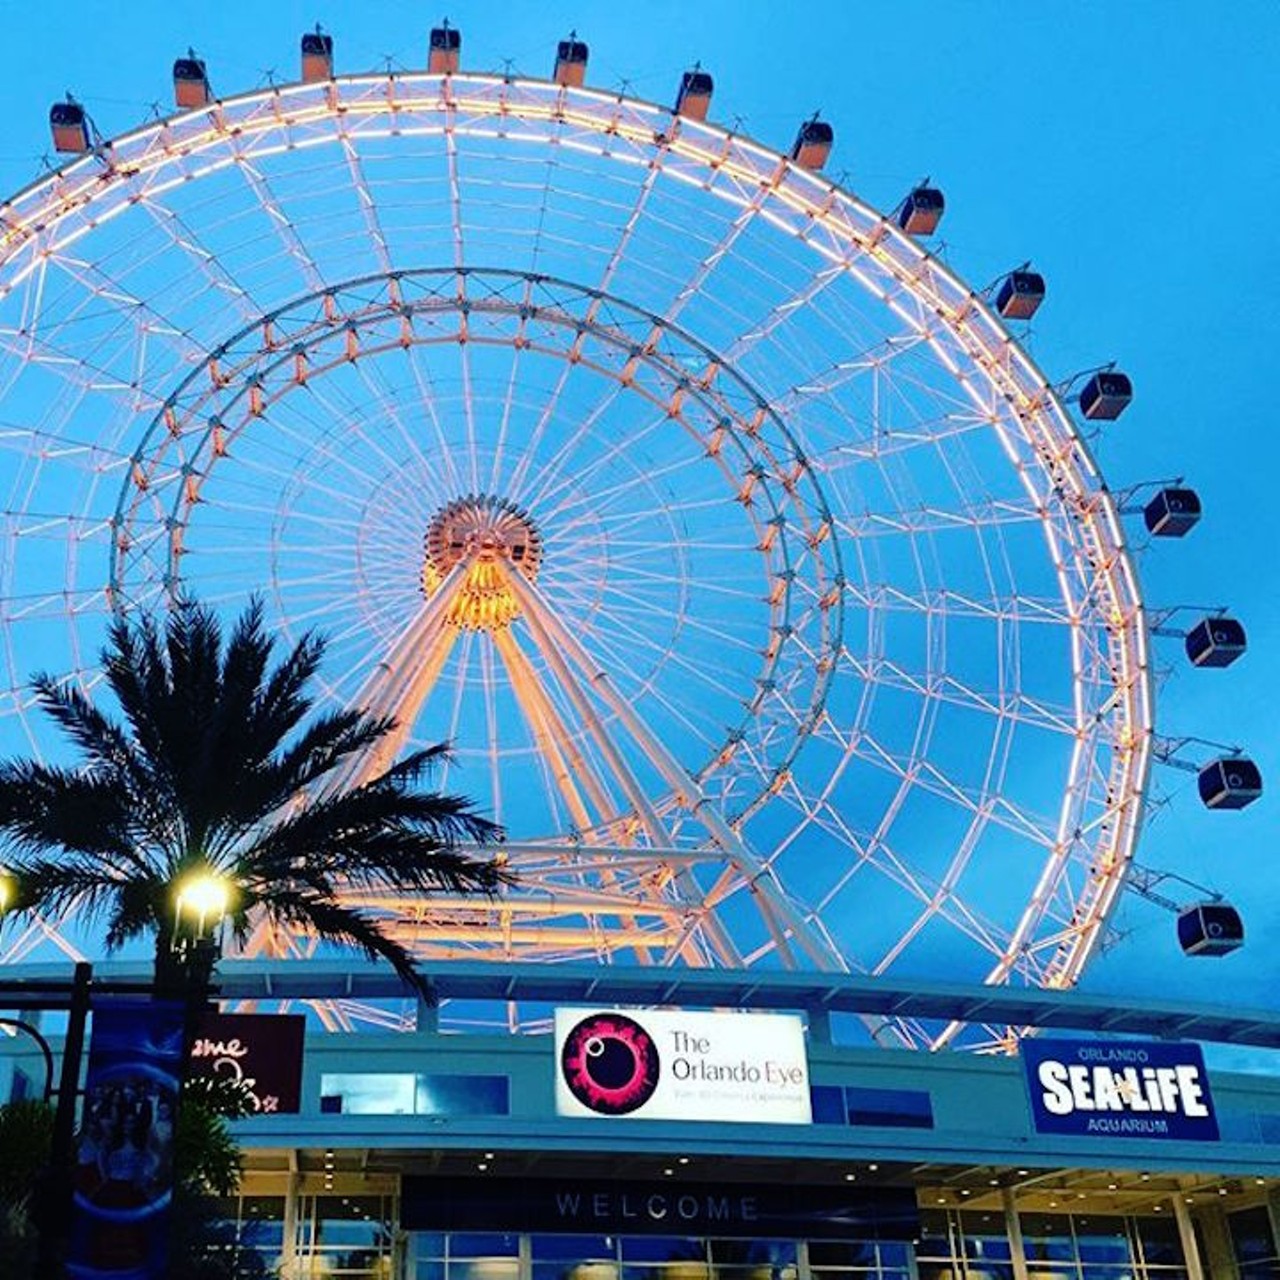  24. Ride the Orlando Eye and hopefully get stuck for 3 hours
Because the odds are pretty good that it will break down at some point. 
Photo via orlando.terapia/Instagram